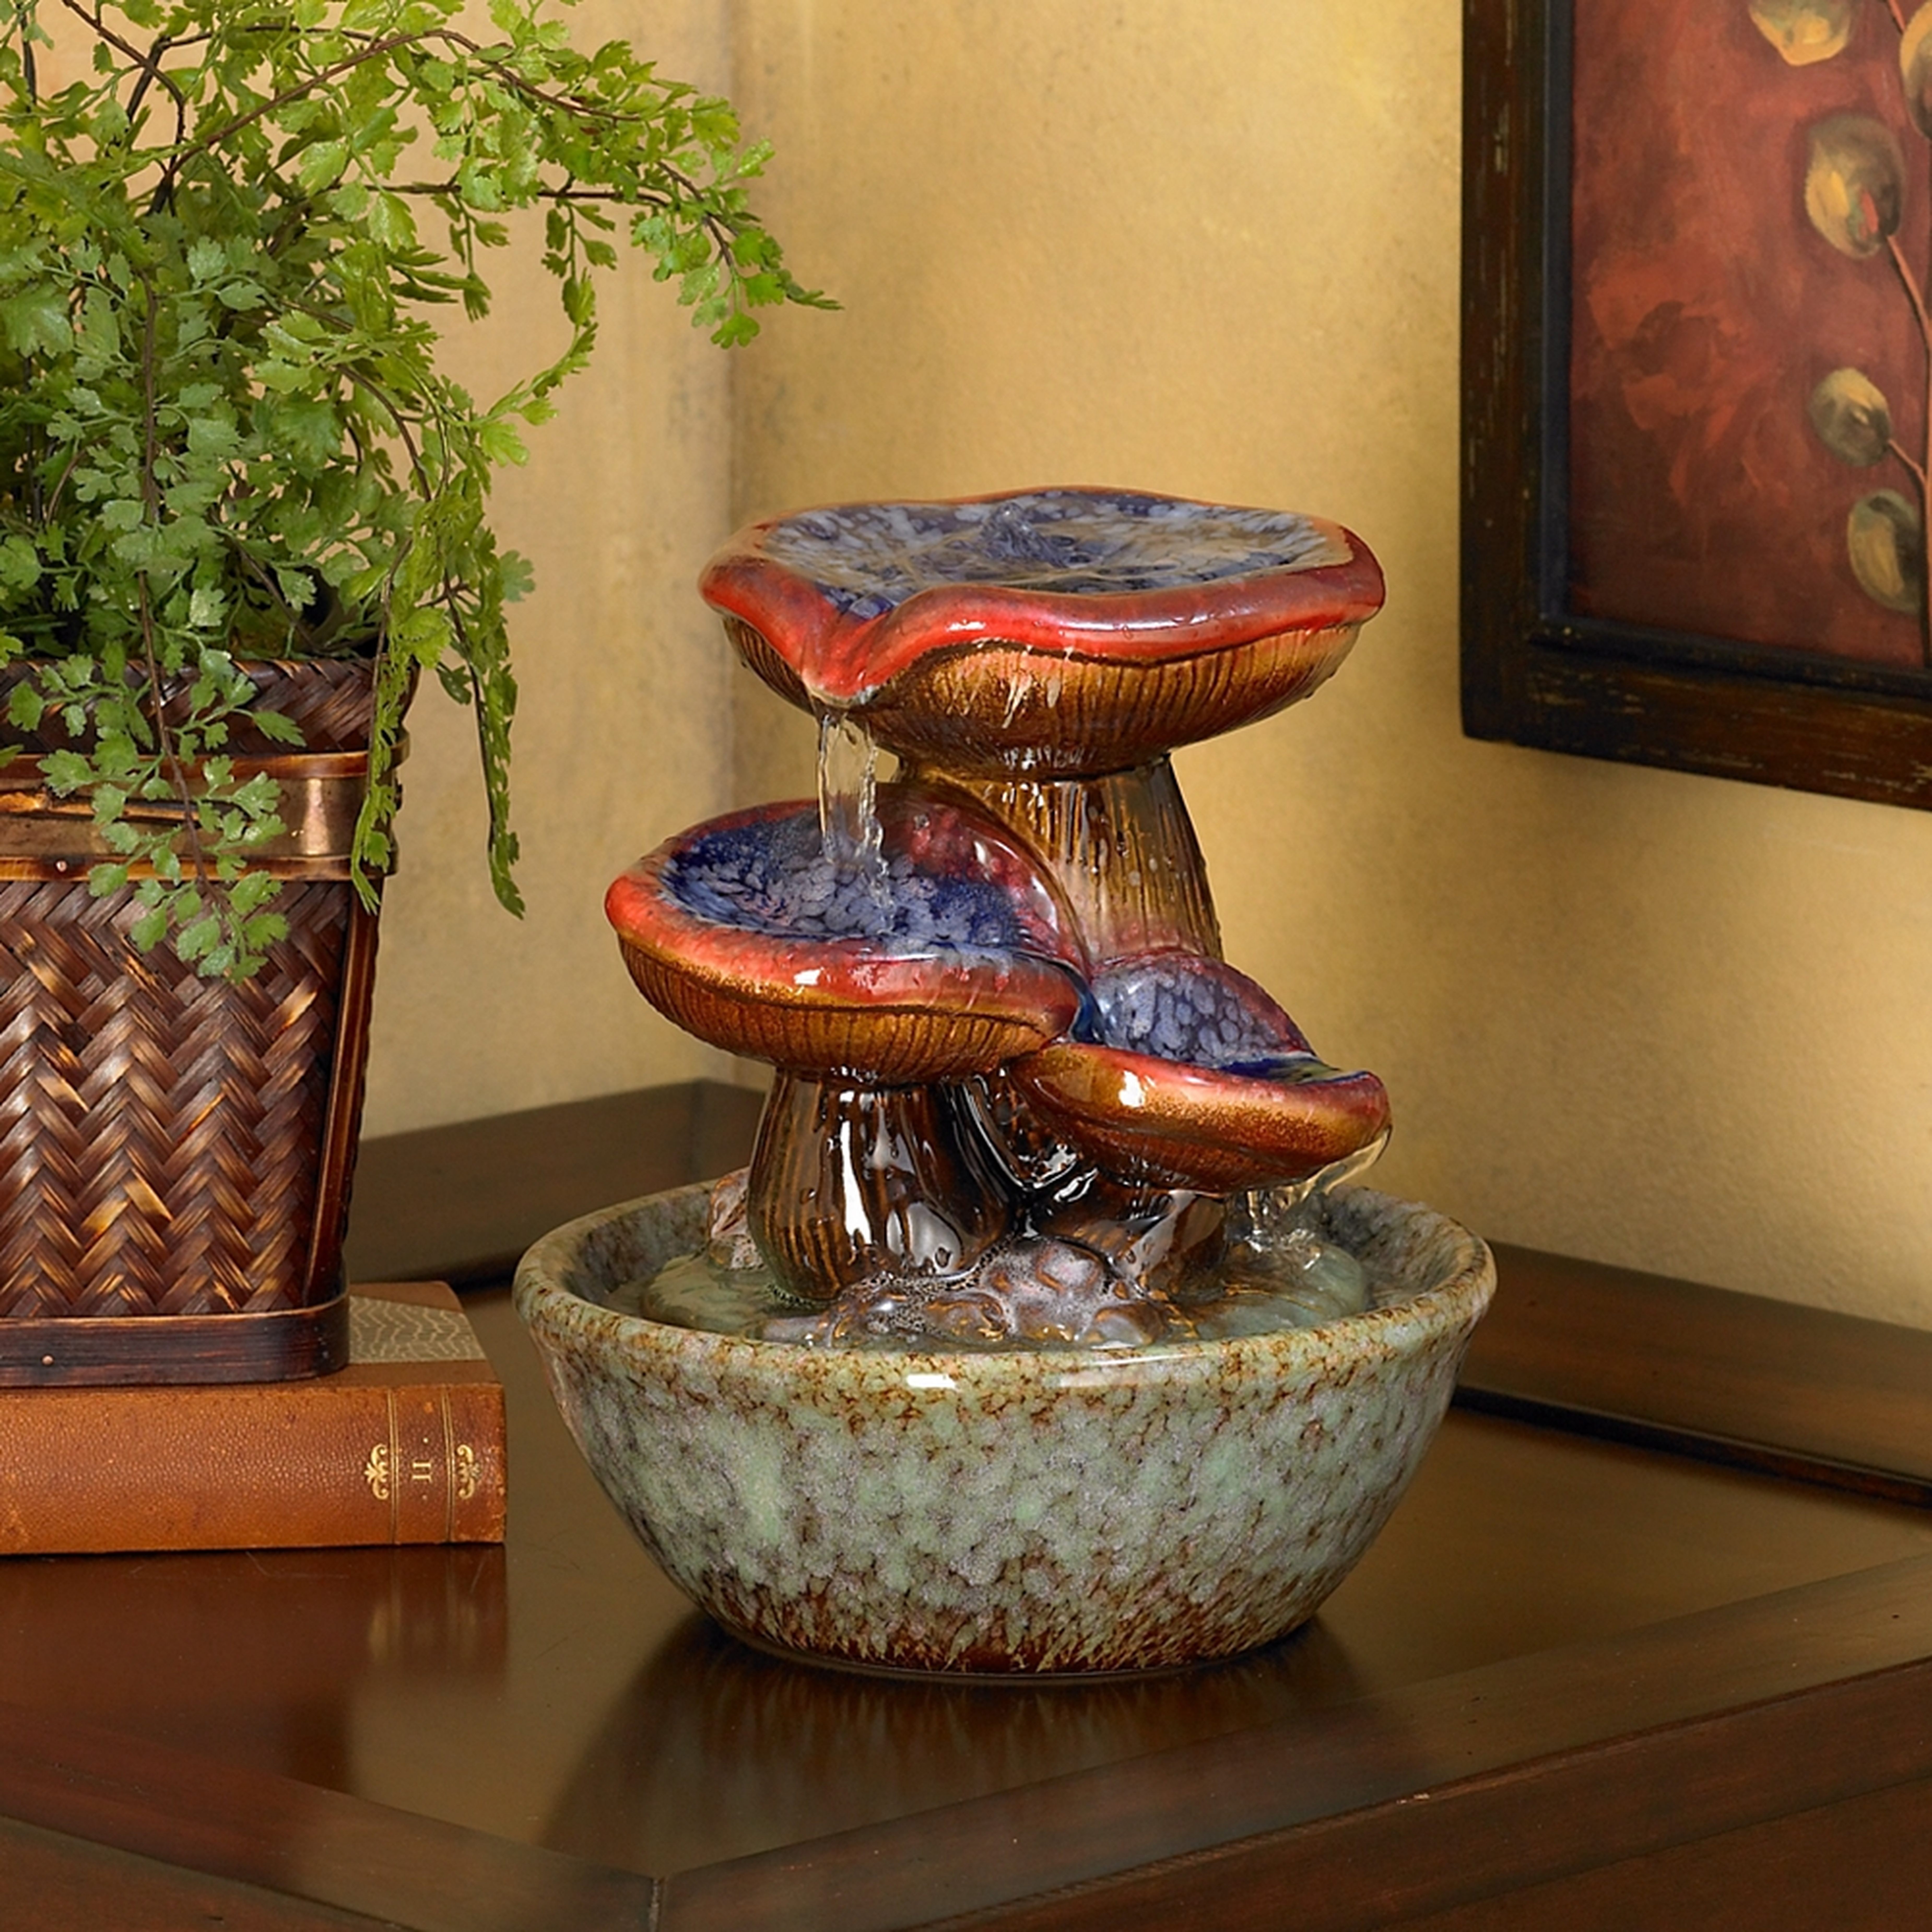 Toadstool 9 1/4" High Three Tier Tabletop Fountain - Style # 56907 - Lamps Plus